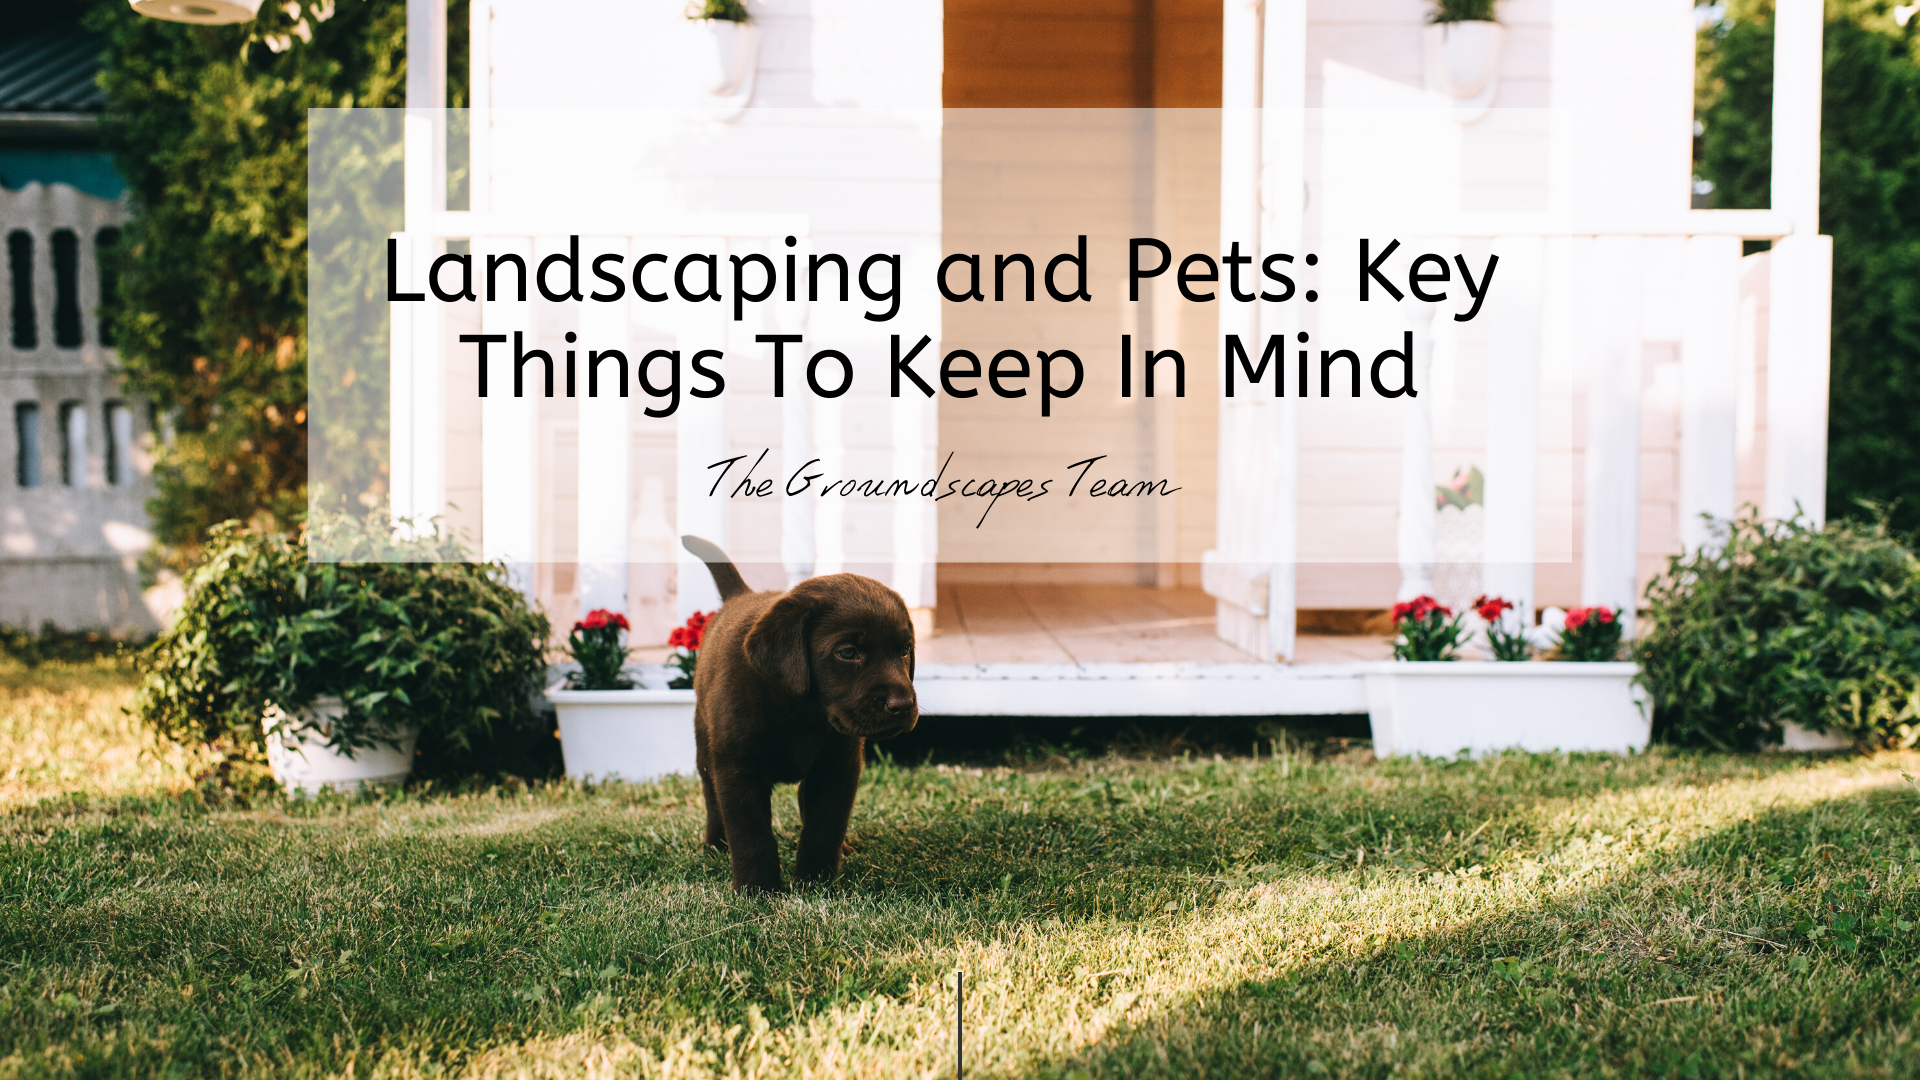 Landscaping and Pets: Key Things To Keep In Mind